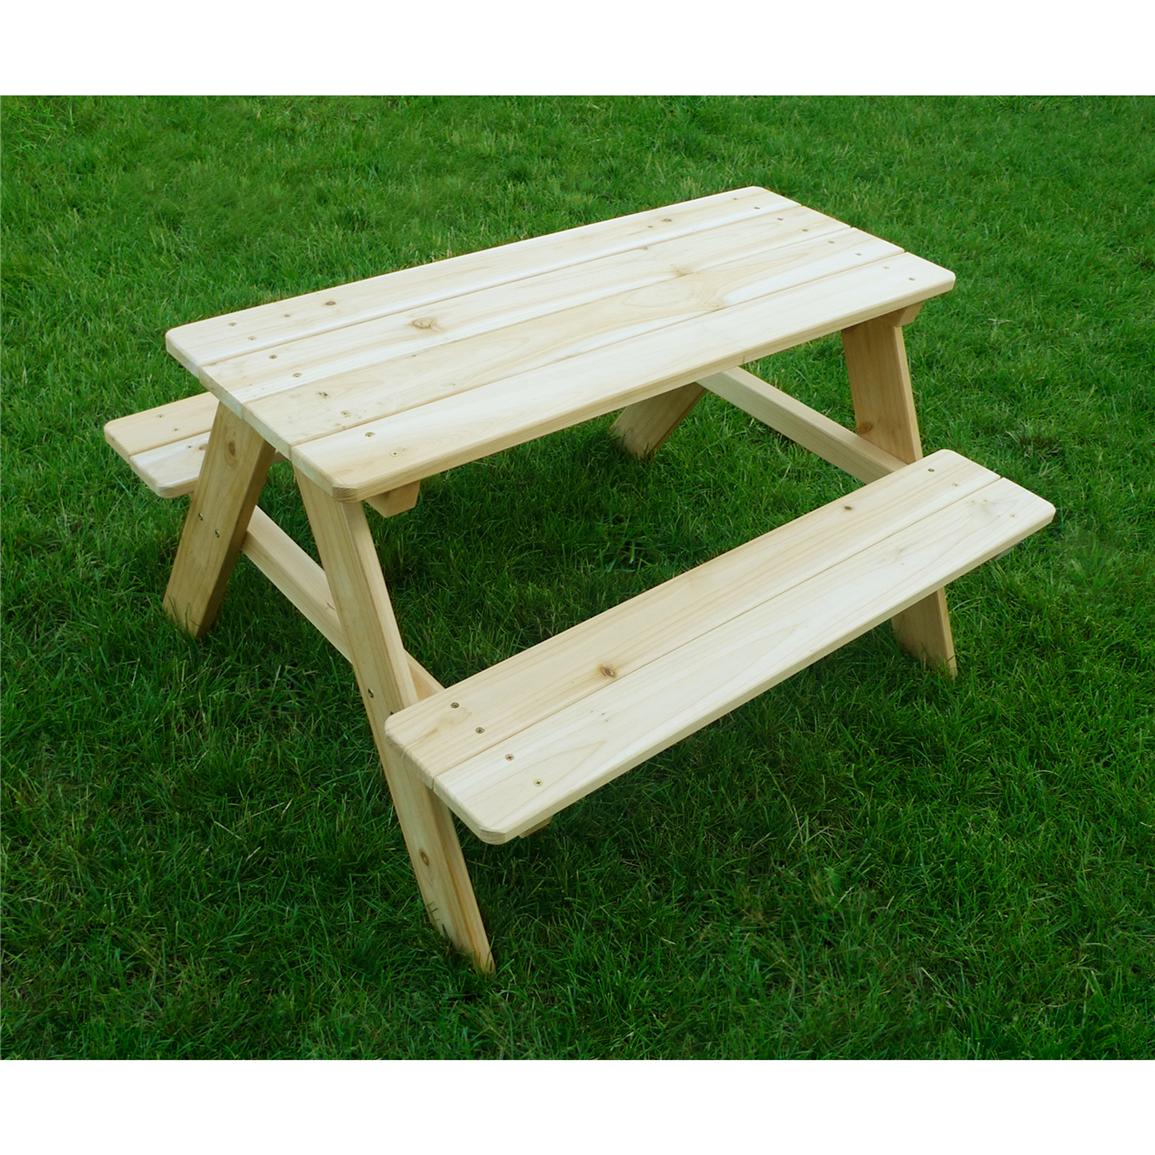 Merry Products™ Kids Wooden Picnic Table - 588458, Patio Furniture at ...